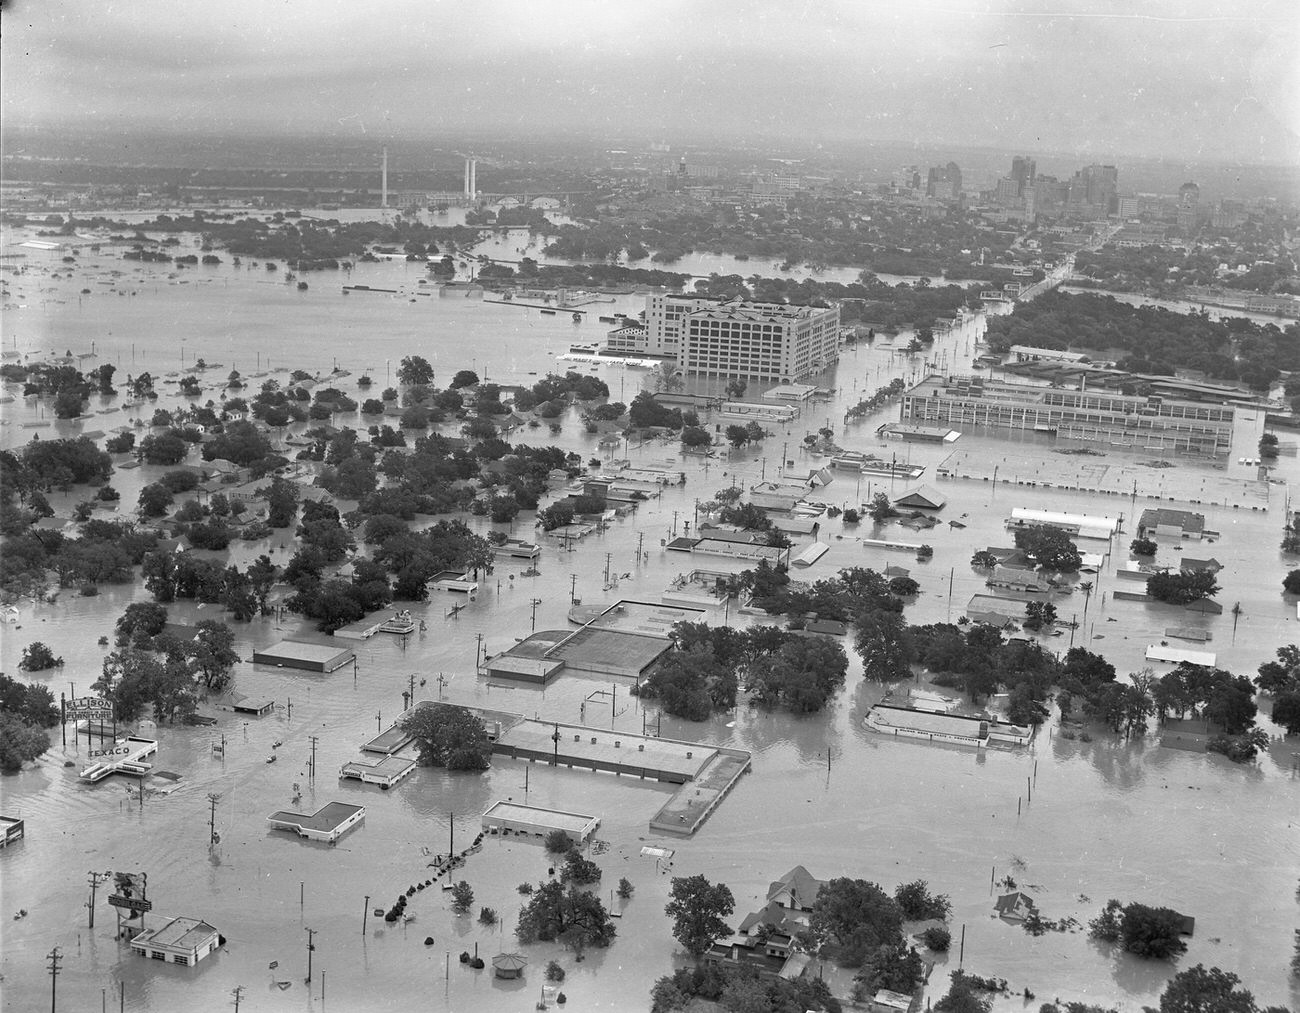 Fort Worth, Texas, flood of 1949, showing 7th Street under water. The large Montgomery Ward building in the upper center received extensive damage. Downtown Fort Worth can be seen in the distance.